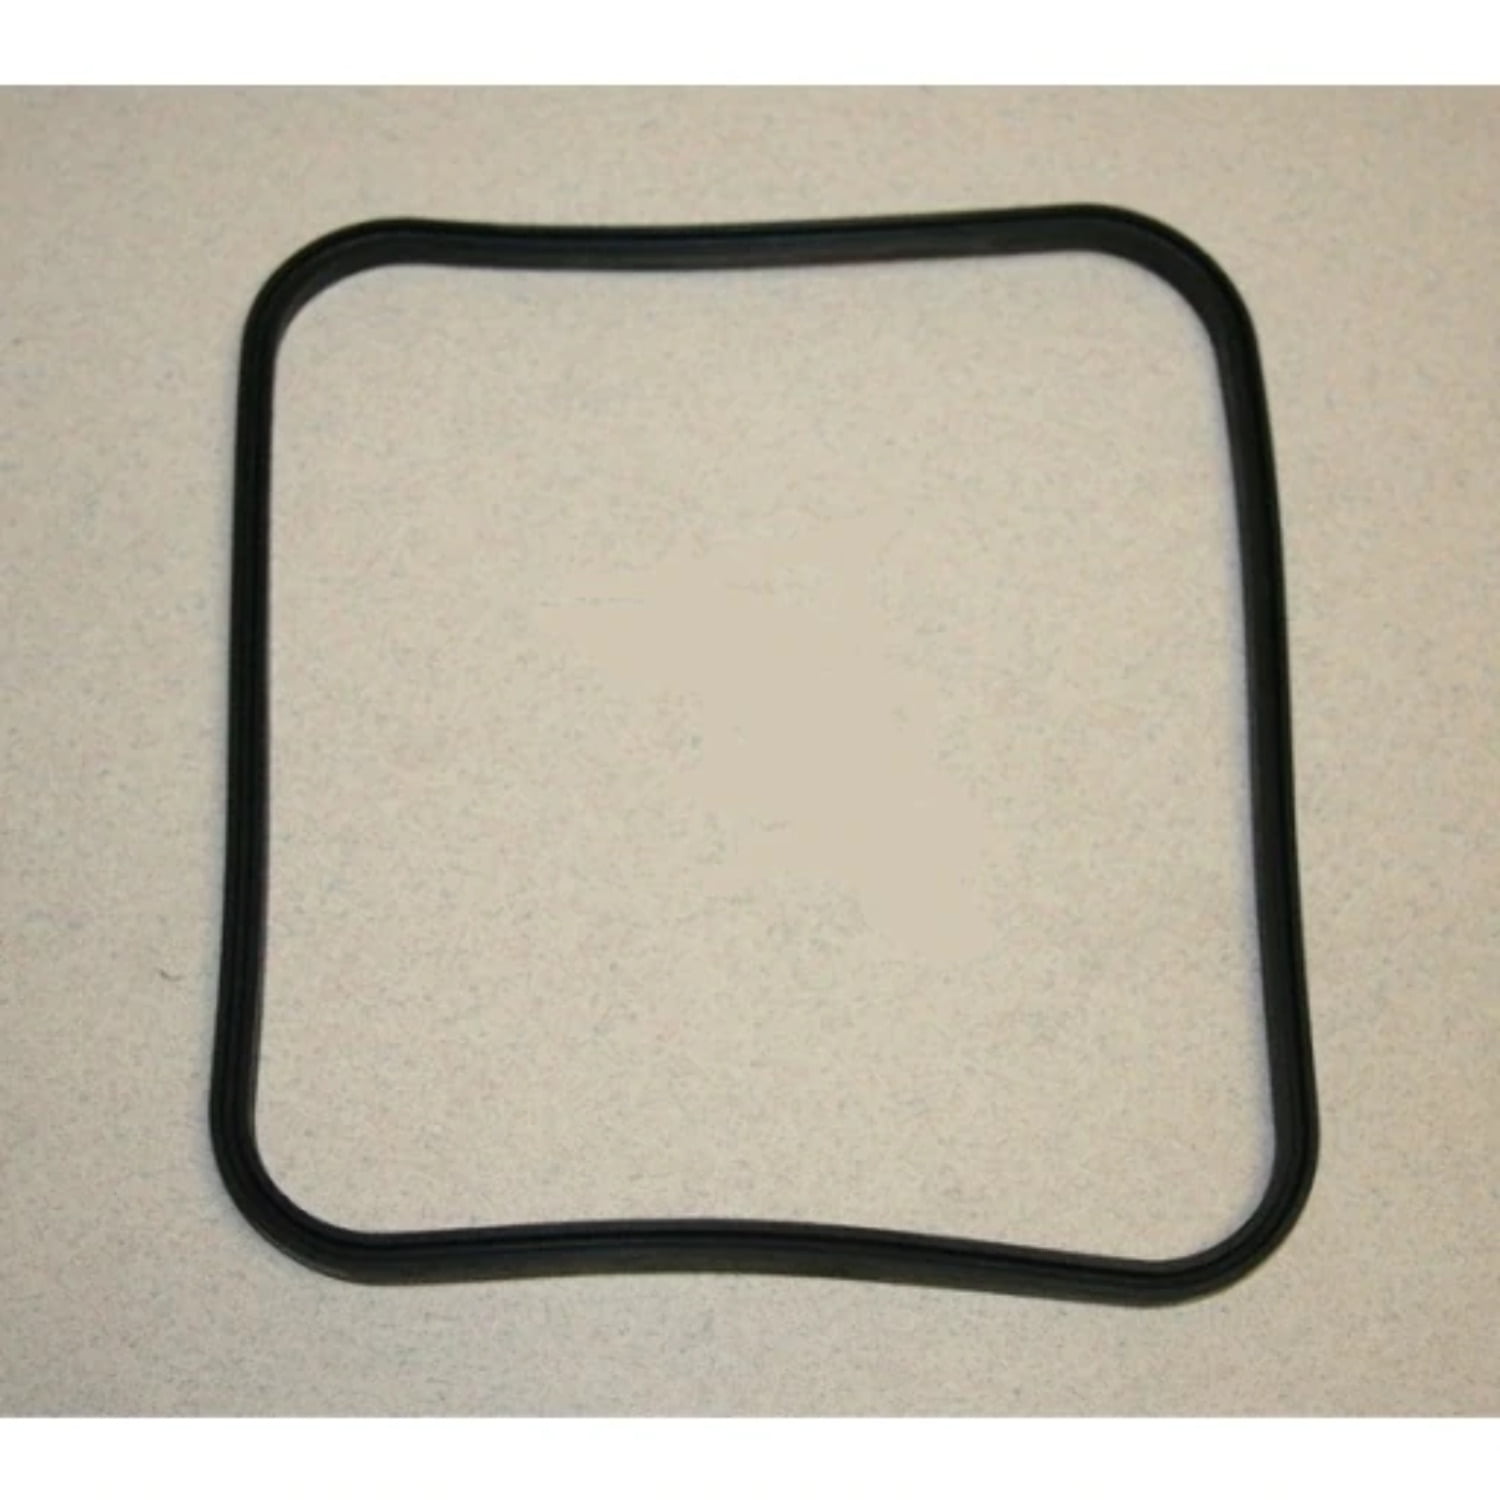 Hayward SPX1600S Cover Gasket Replacement for Hayward Superpump 